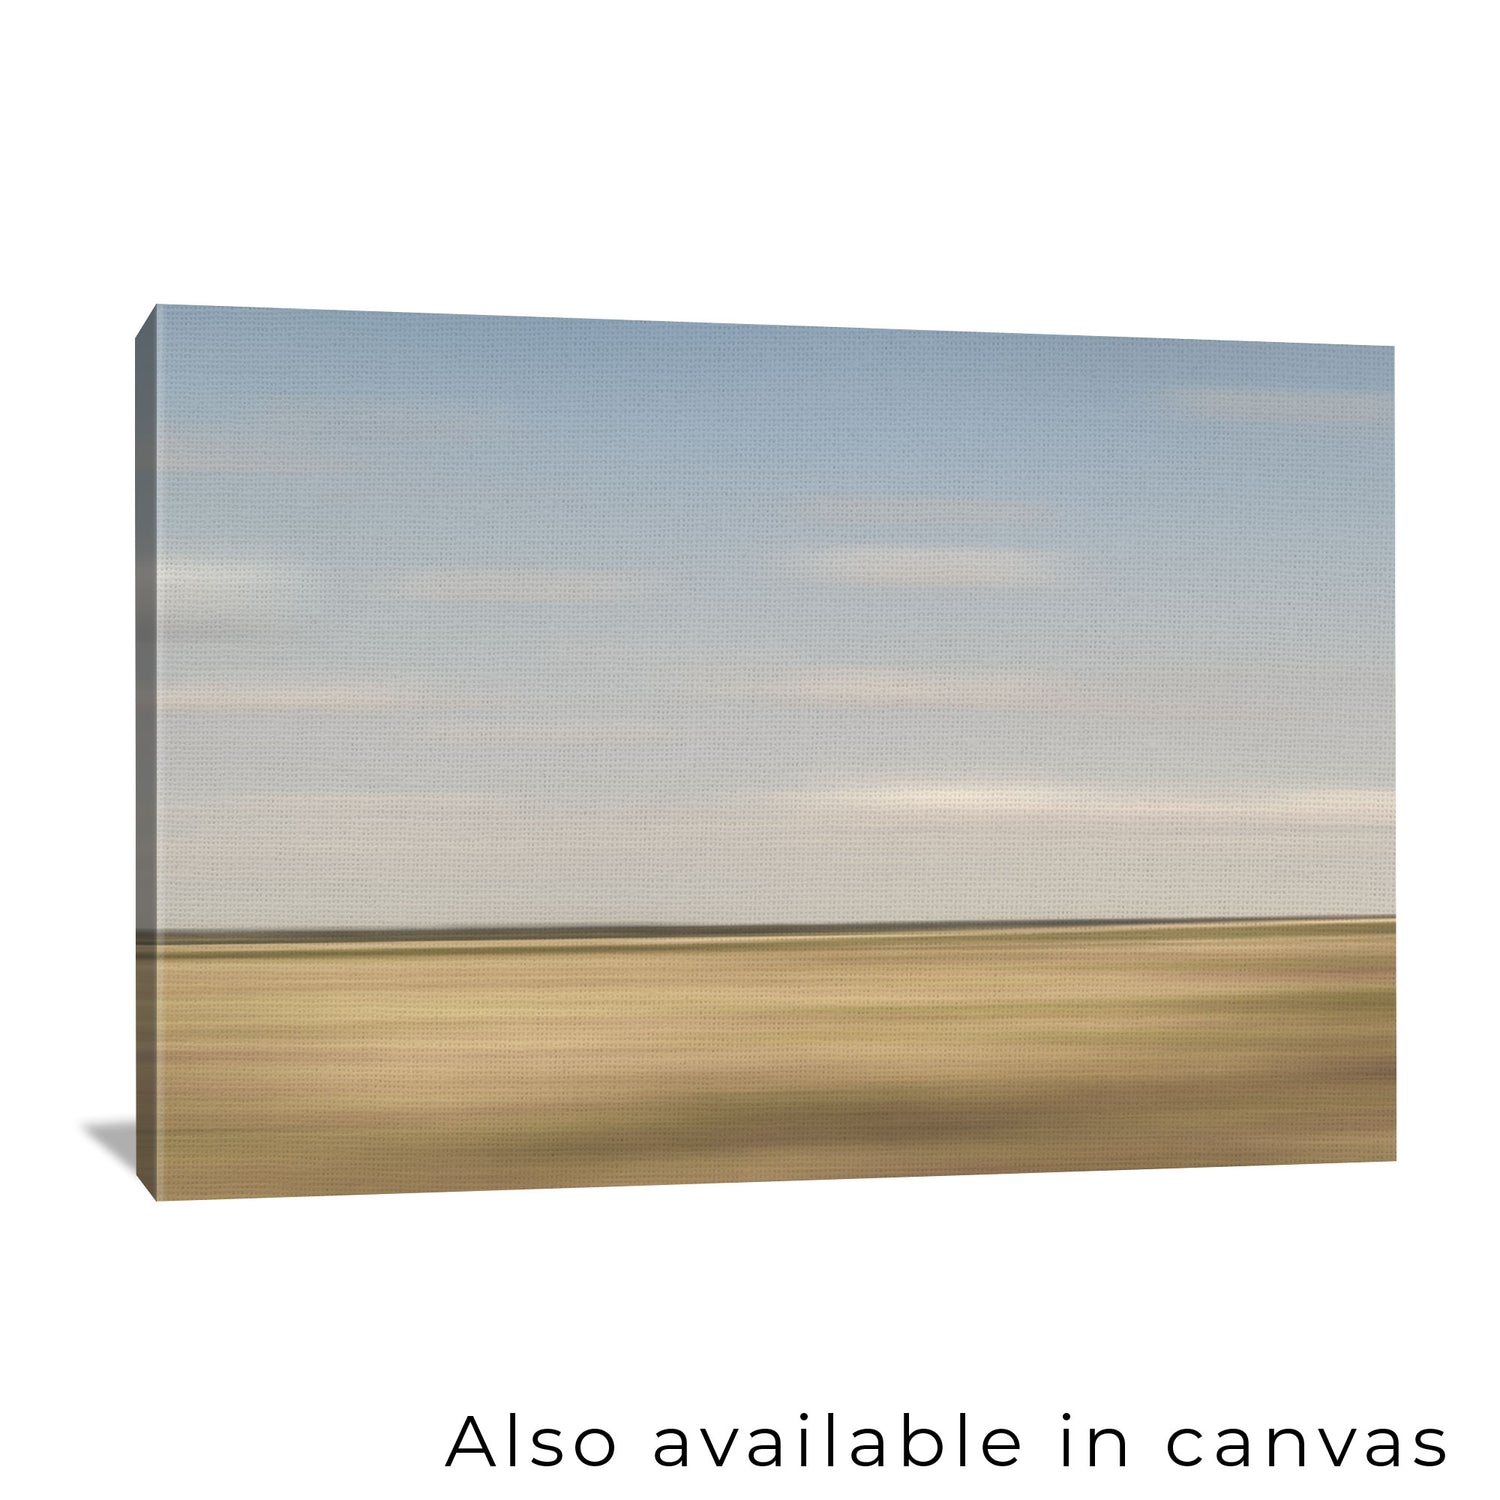 The abstract prairie photograph is beautifully presented on a gallery-wrapped canvas, showing this photograph is also available as a canvas print for those interested in a ready-to-hang solution.